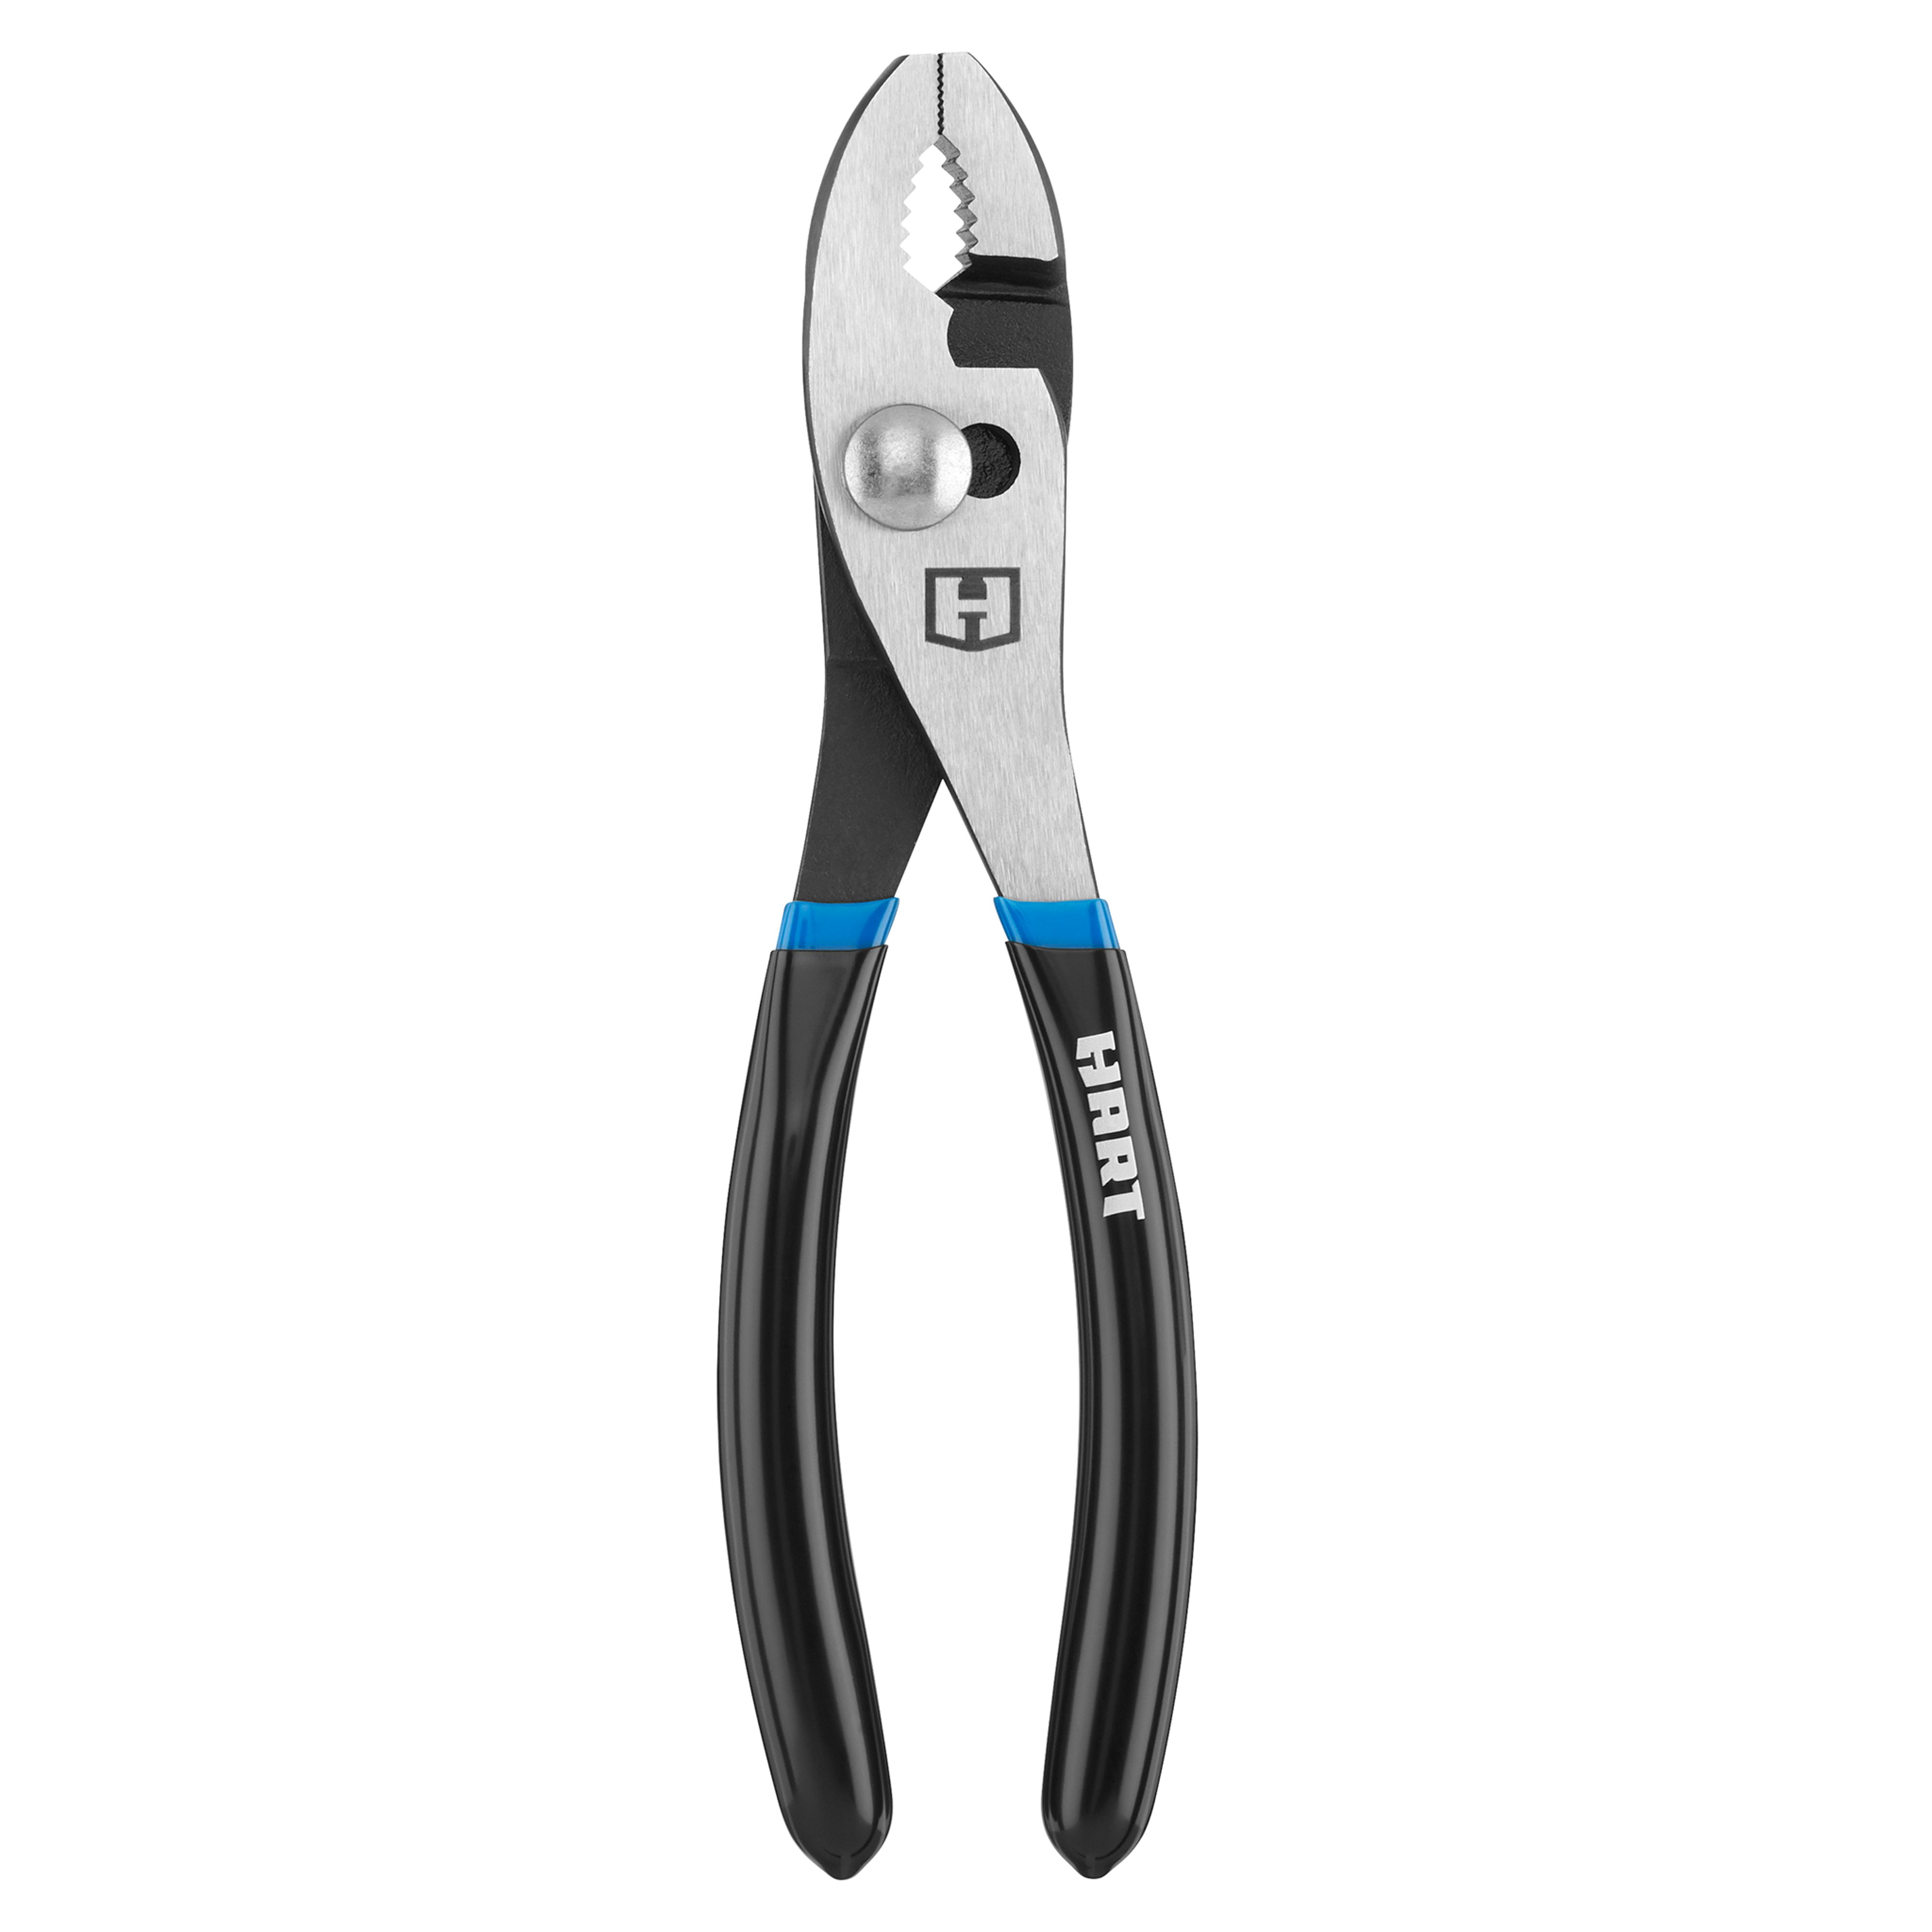 HART 2-Piece Pliers Set, 6-inch Long Nose, 8-inch Slip Joint - image 3 of 11